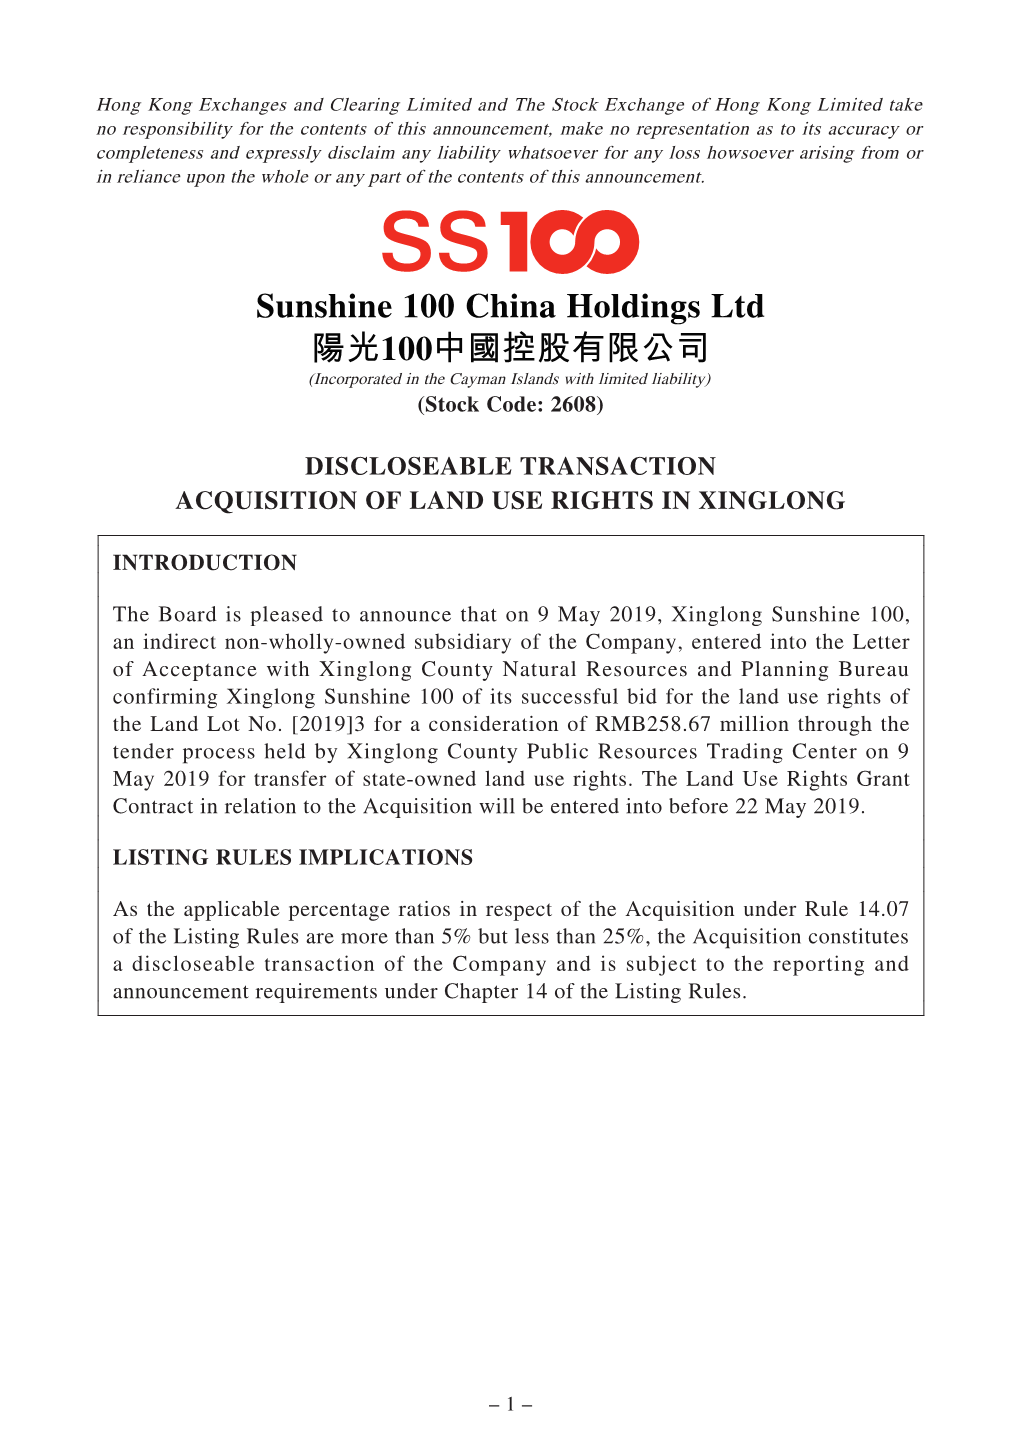 Sunshine 100 China Holdings Ltd 陽光100中國控股有限公司 (Incorporated in the Cayman Islands with Limited Liability) (Stock Code: 2608)